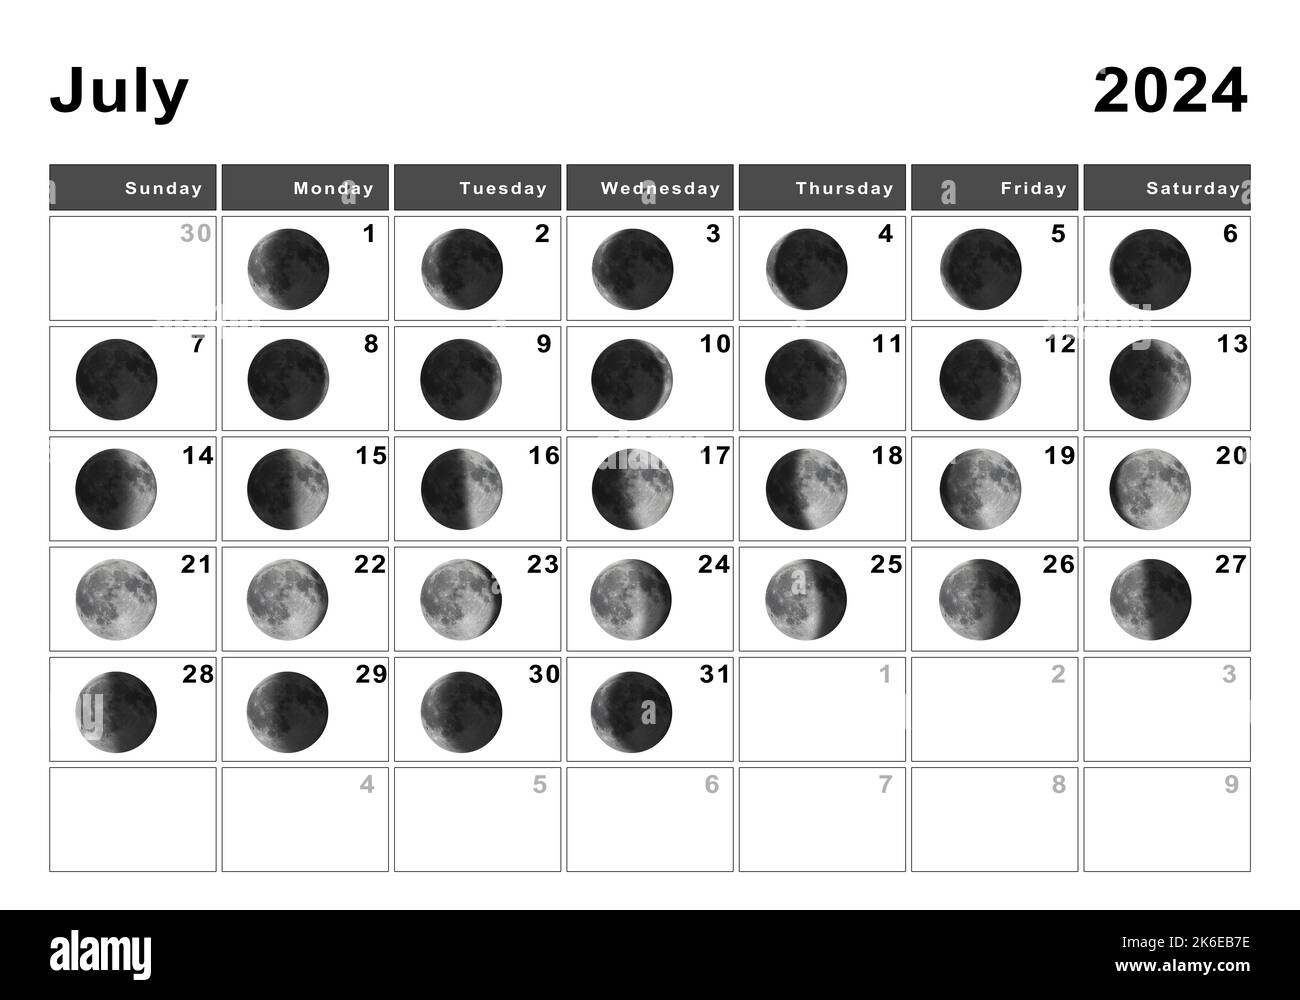 July 2024 Lunar Calendar, Moon Cycles, Moon Phases Stock Photo - Alamy with July Moon Calendar 2024